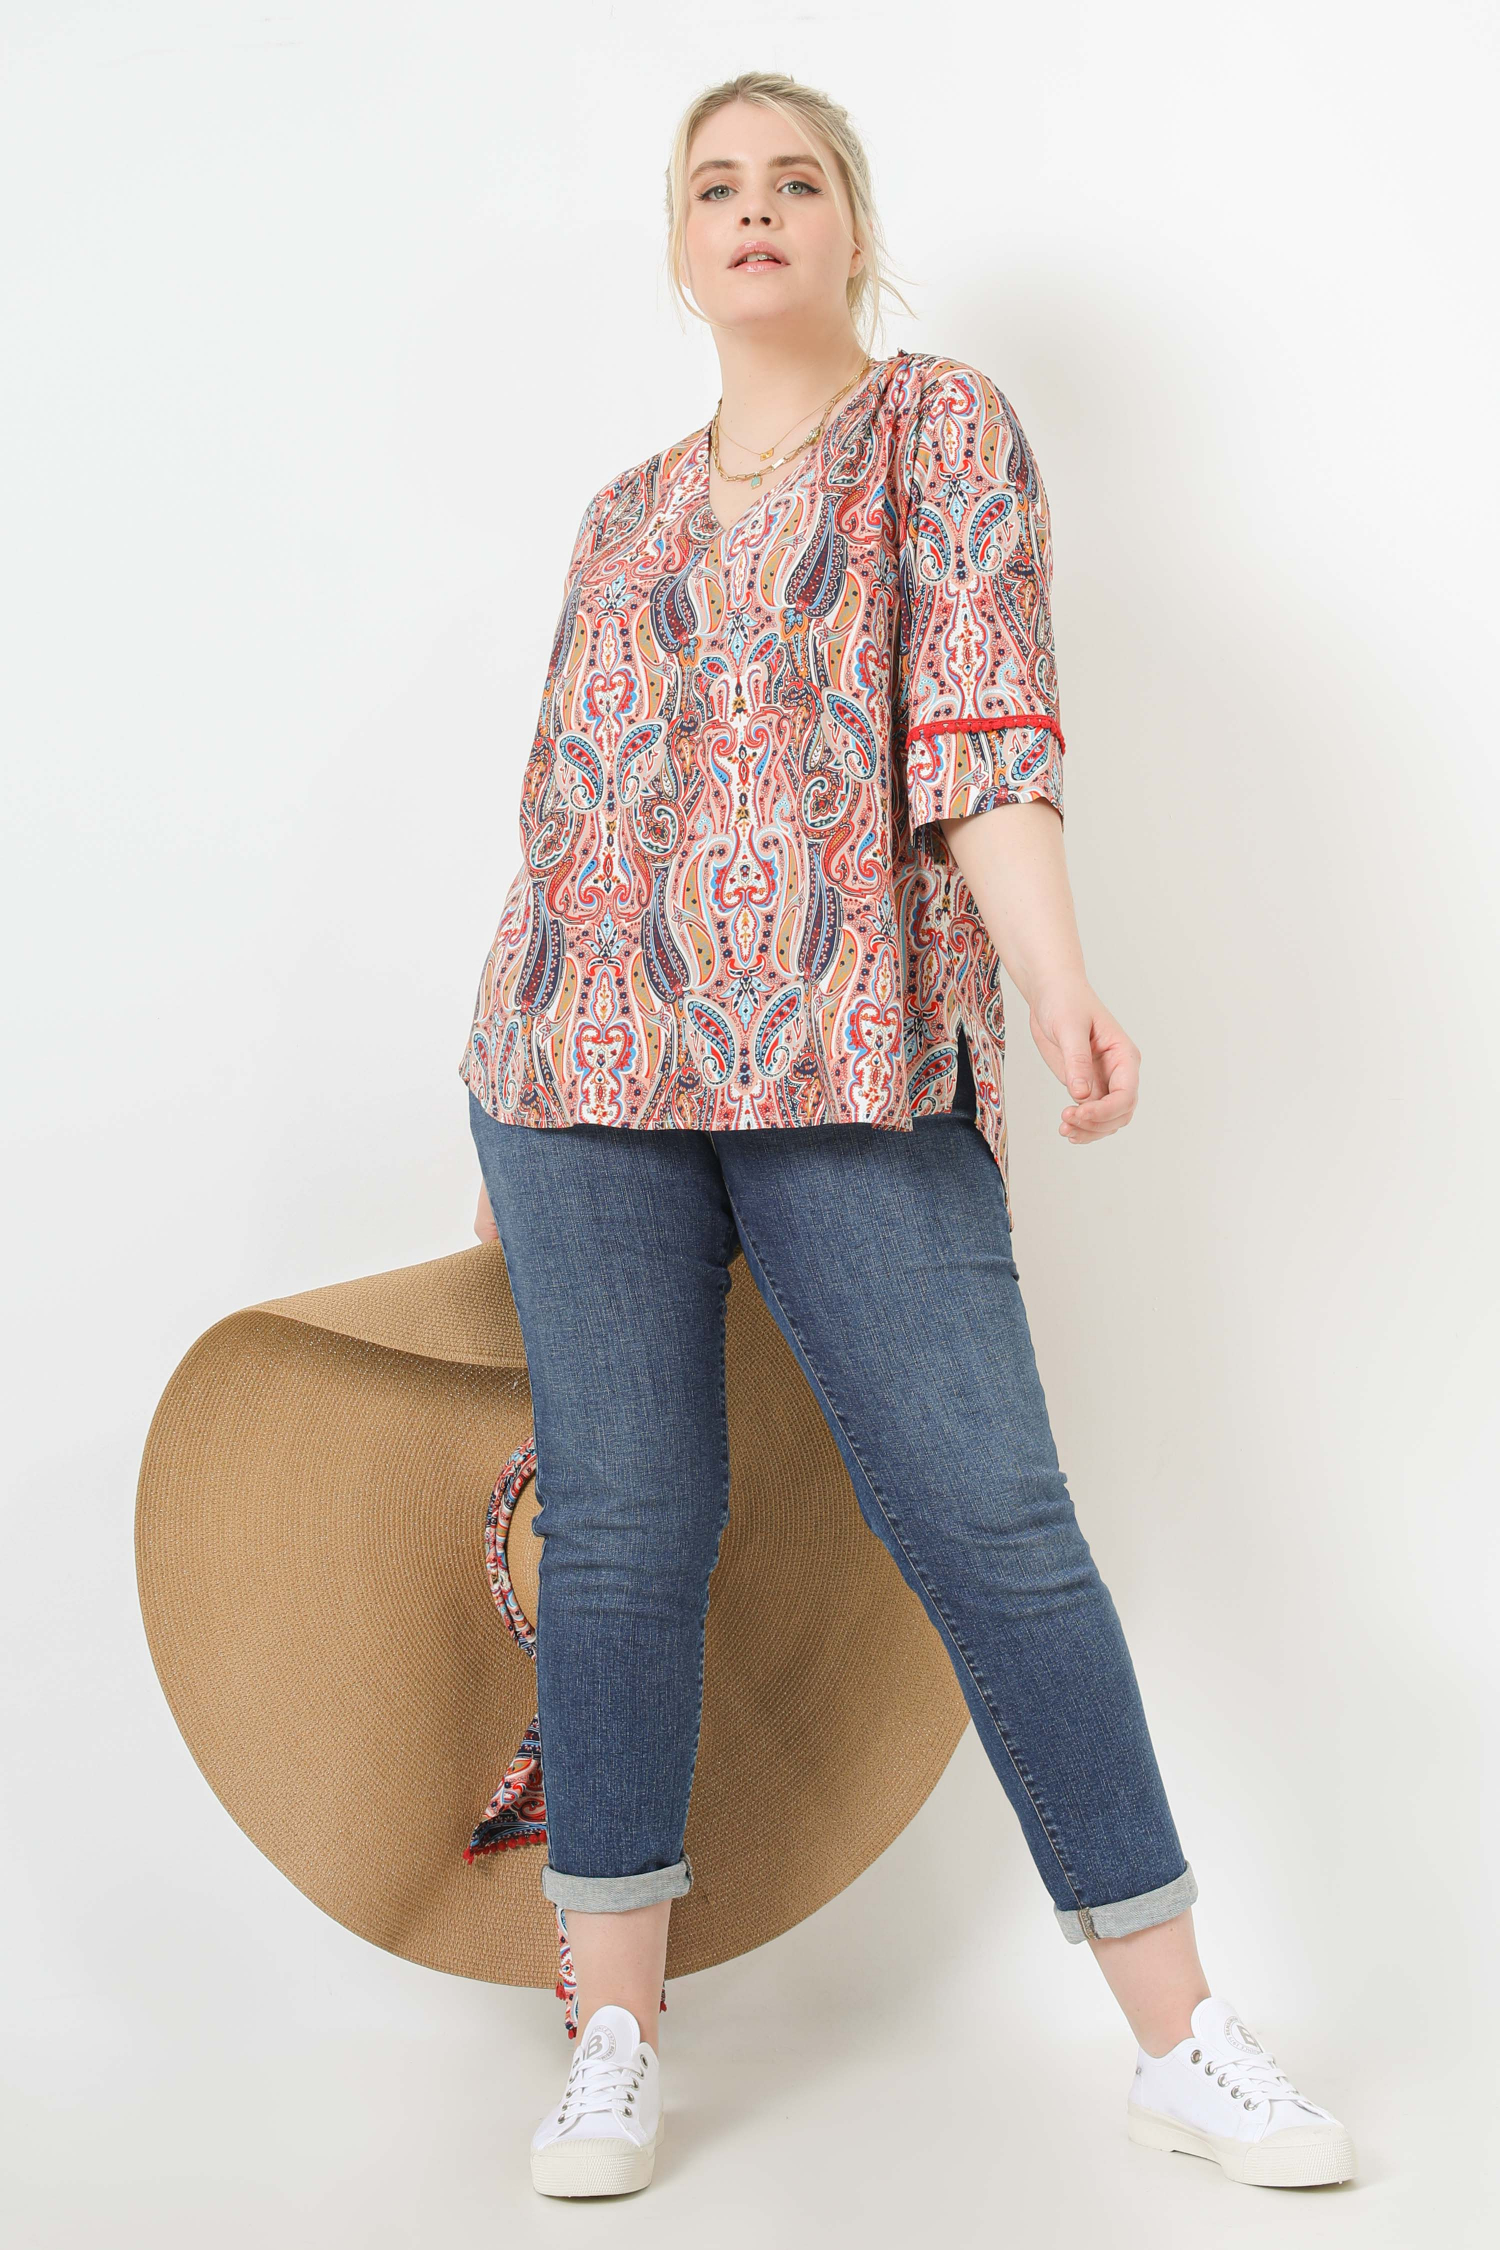 V-neck printed blouse in éco-responsable fabric